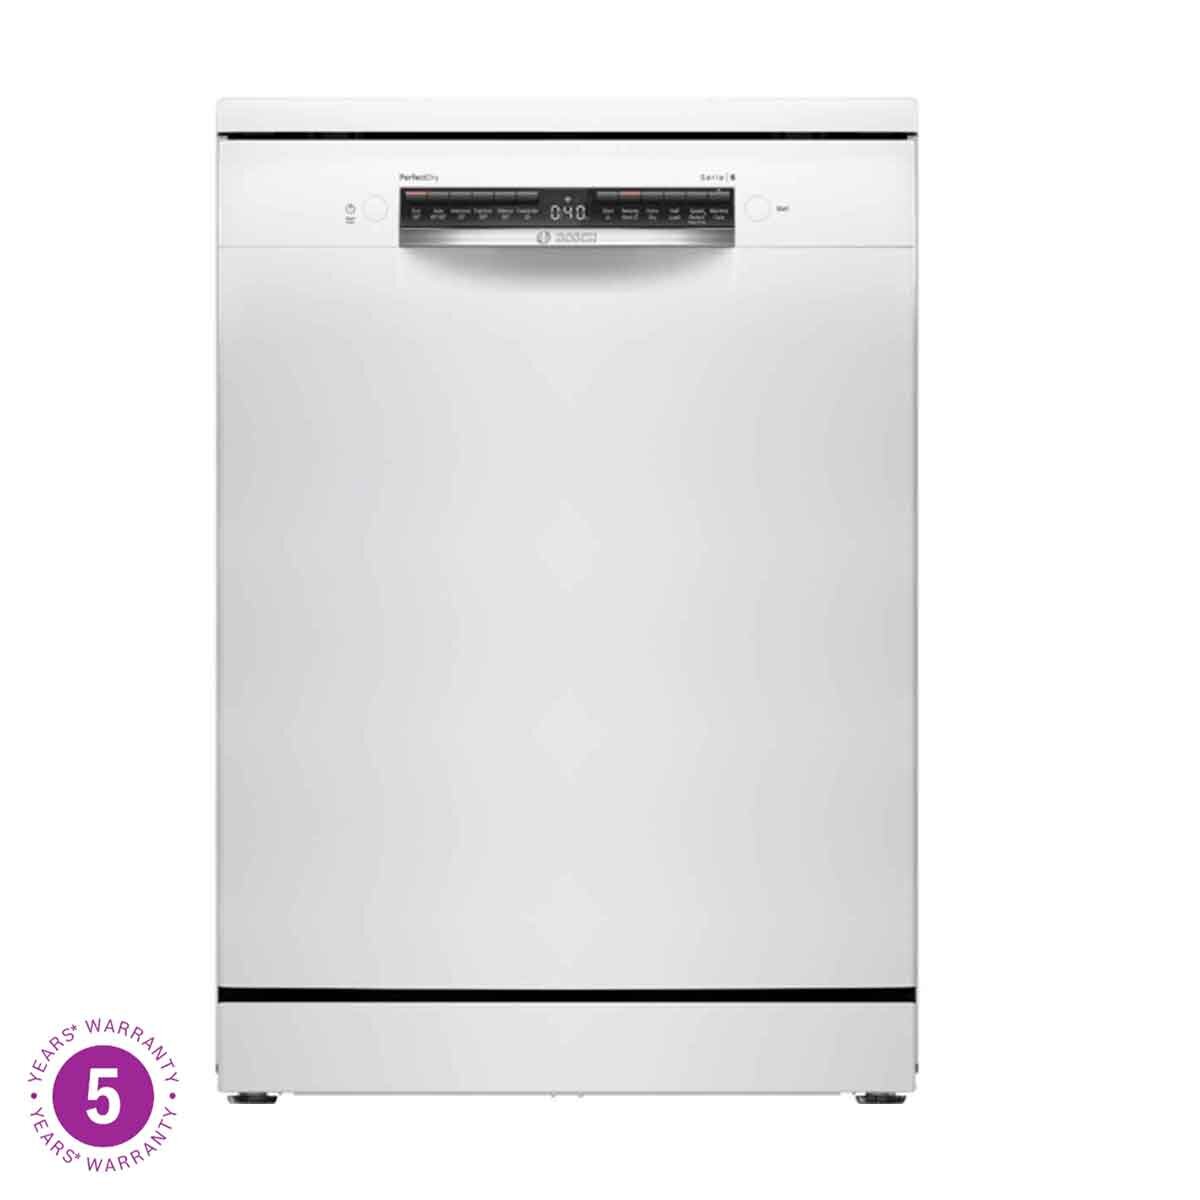 Buy Bosch SMS6ZCW10G Series 6 Freestanding 14 Place Setting Dishwasher, B Rated in White at Costco.co.uk